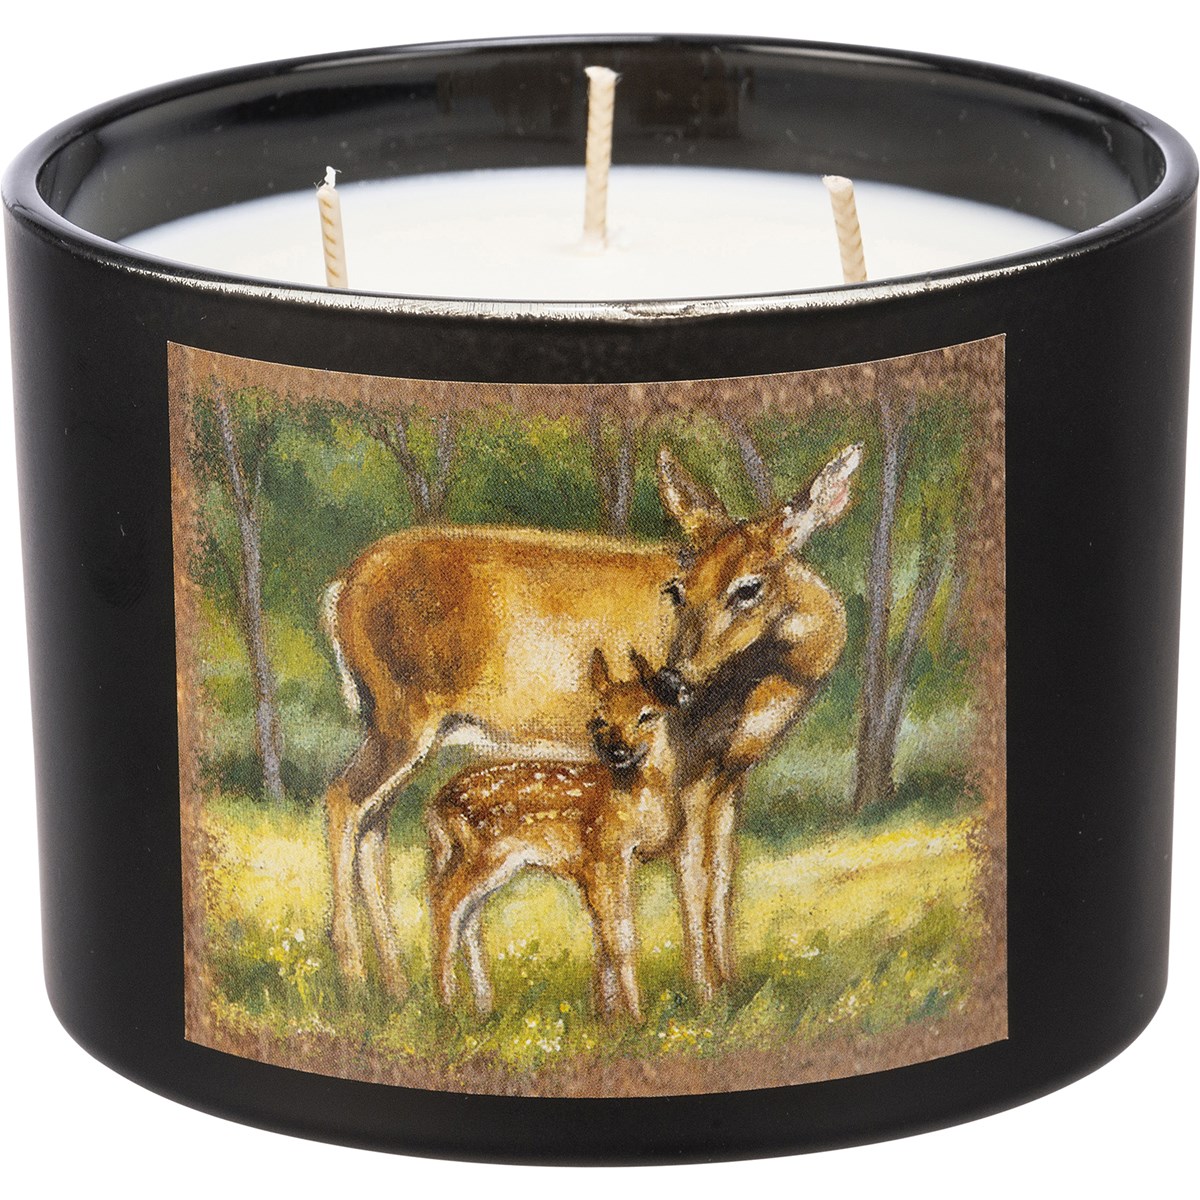 Deer Candle - Soy Wax, Glass, Cotton